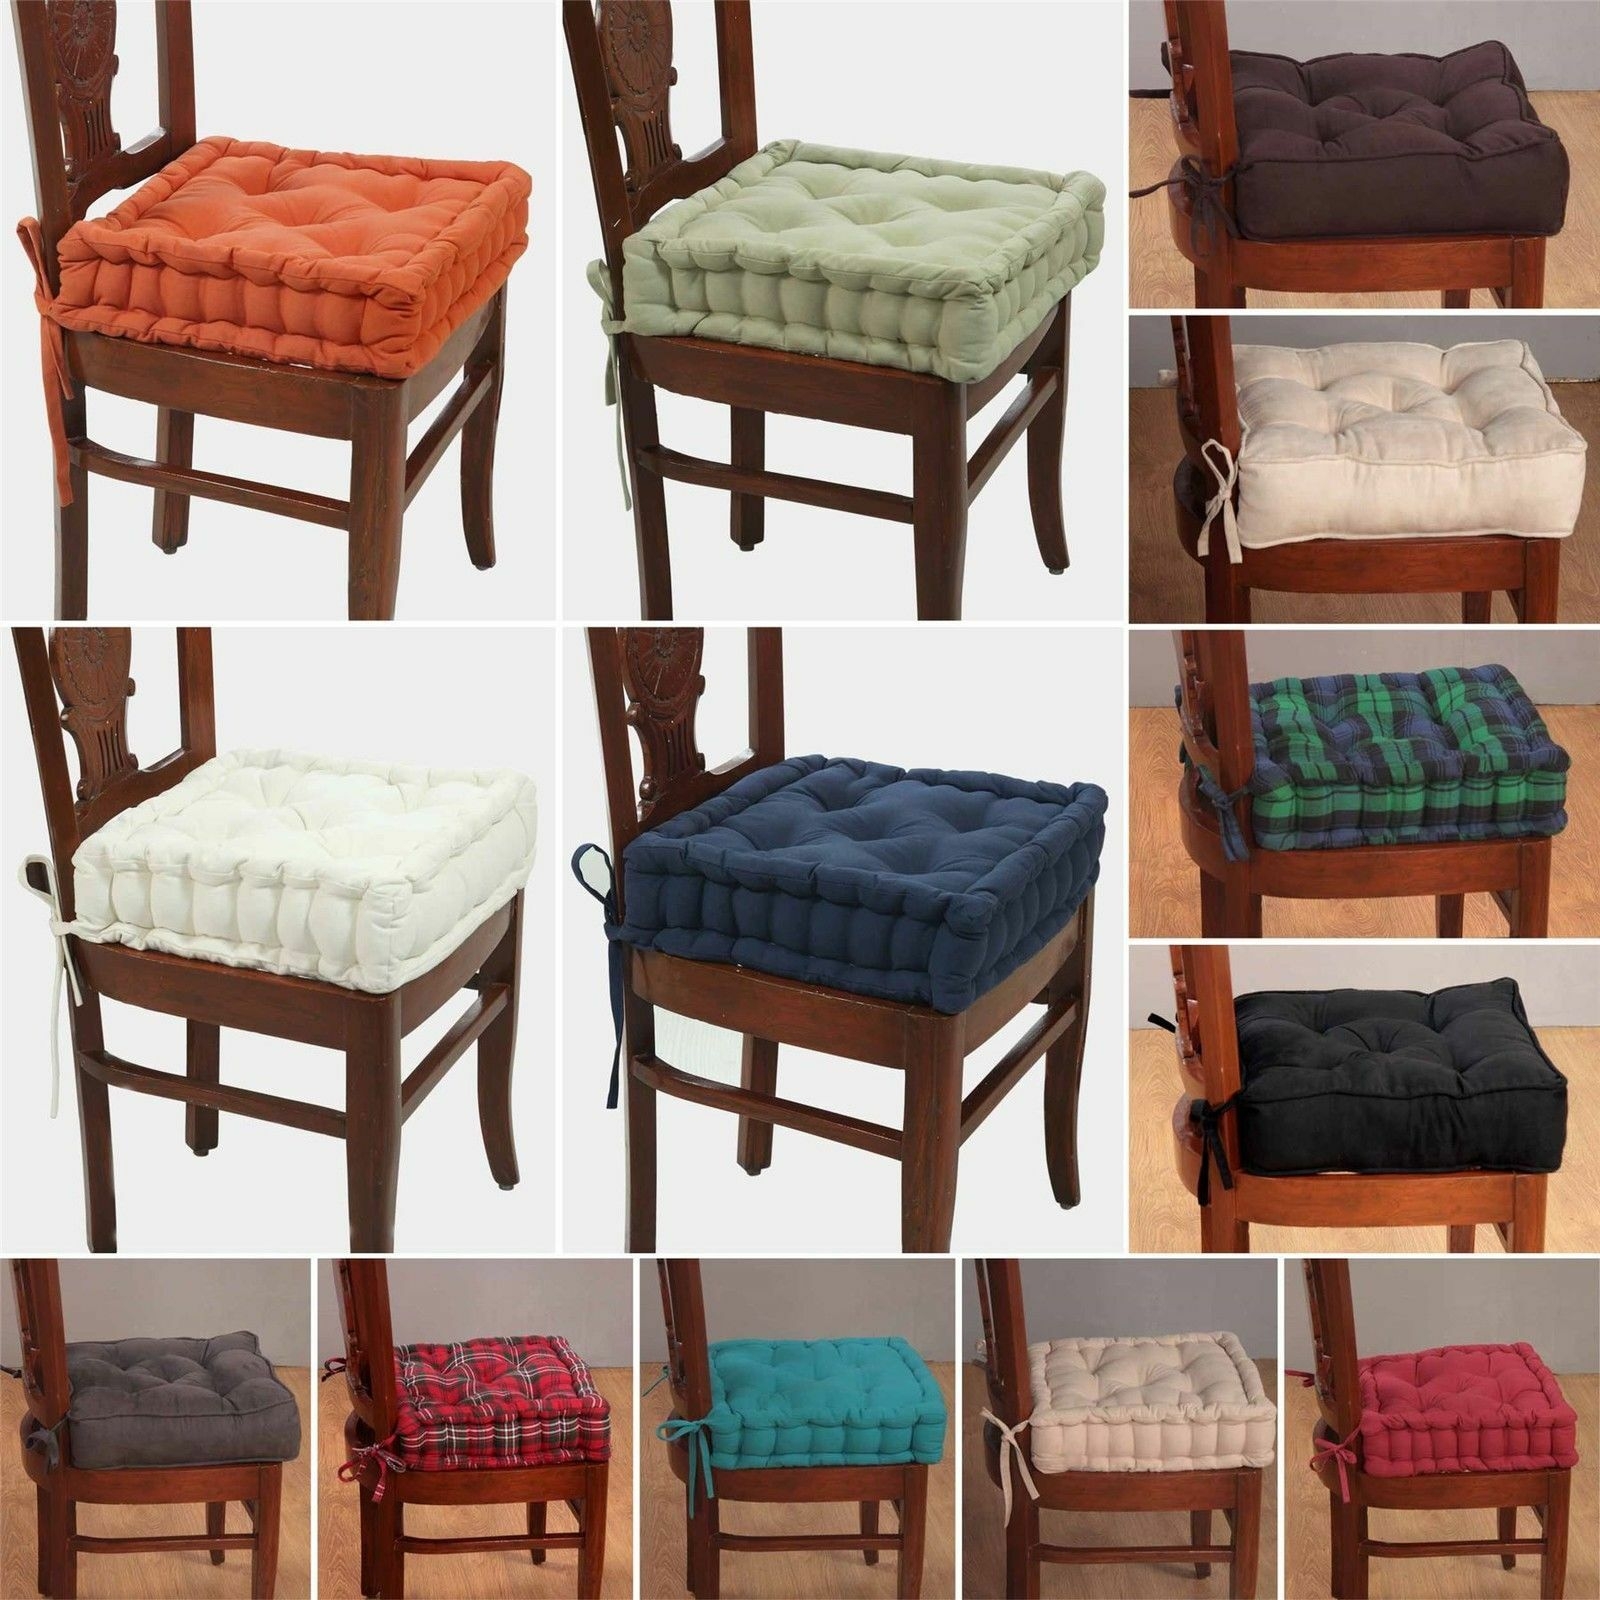 Chair Pads With Ties Visualhunt, Dining Chair Seat Pads With Ties